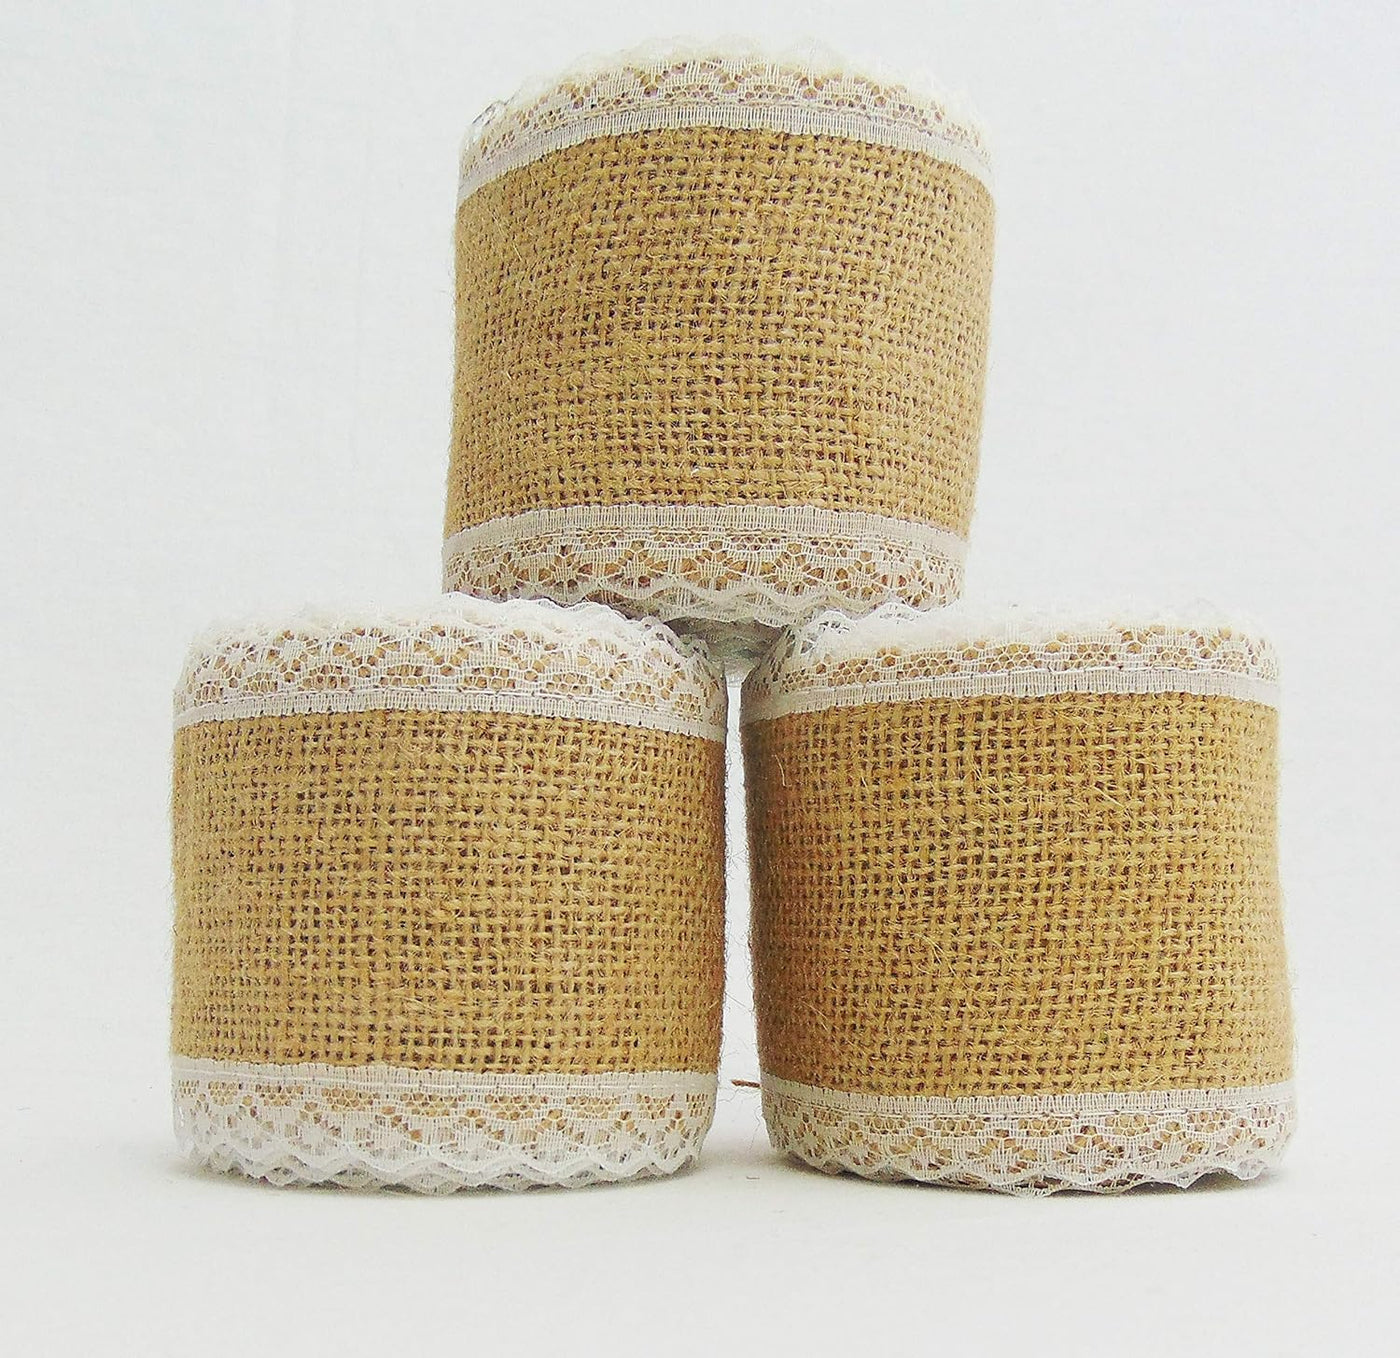 AAYU 3 Pack - 3" Burlap Ribbon roll 15ft with lace | 3 Inches x 5 Yards Natural Jute Roll Perfect for Wedding Decoration Gift Wrapping and DIY Crafts (White Lace on Both Sides) Total 15 Yards